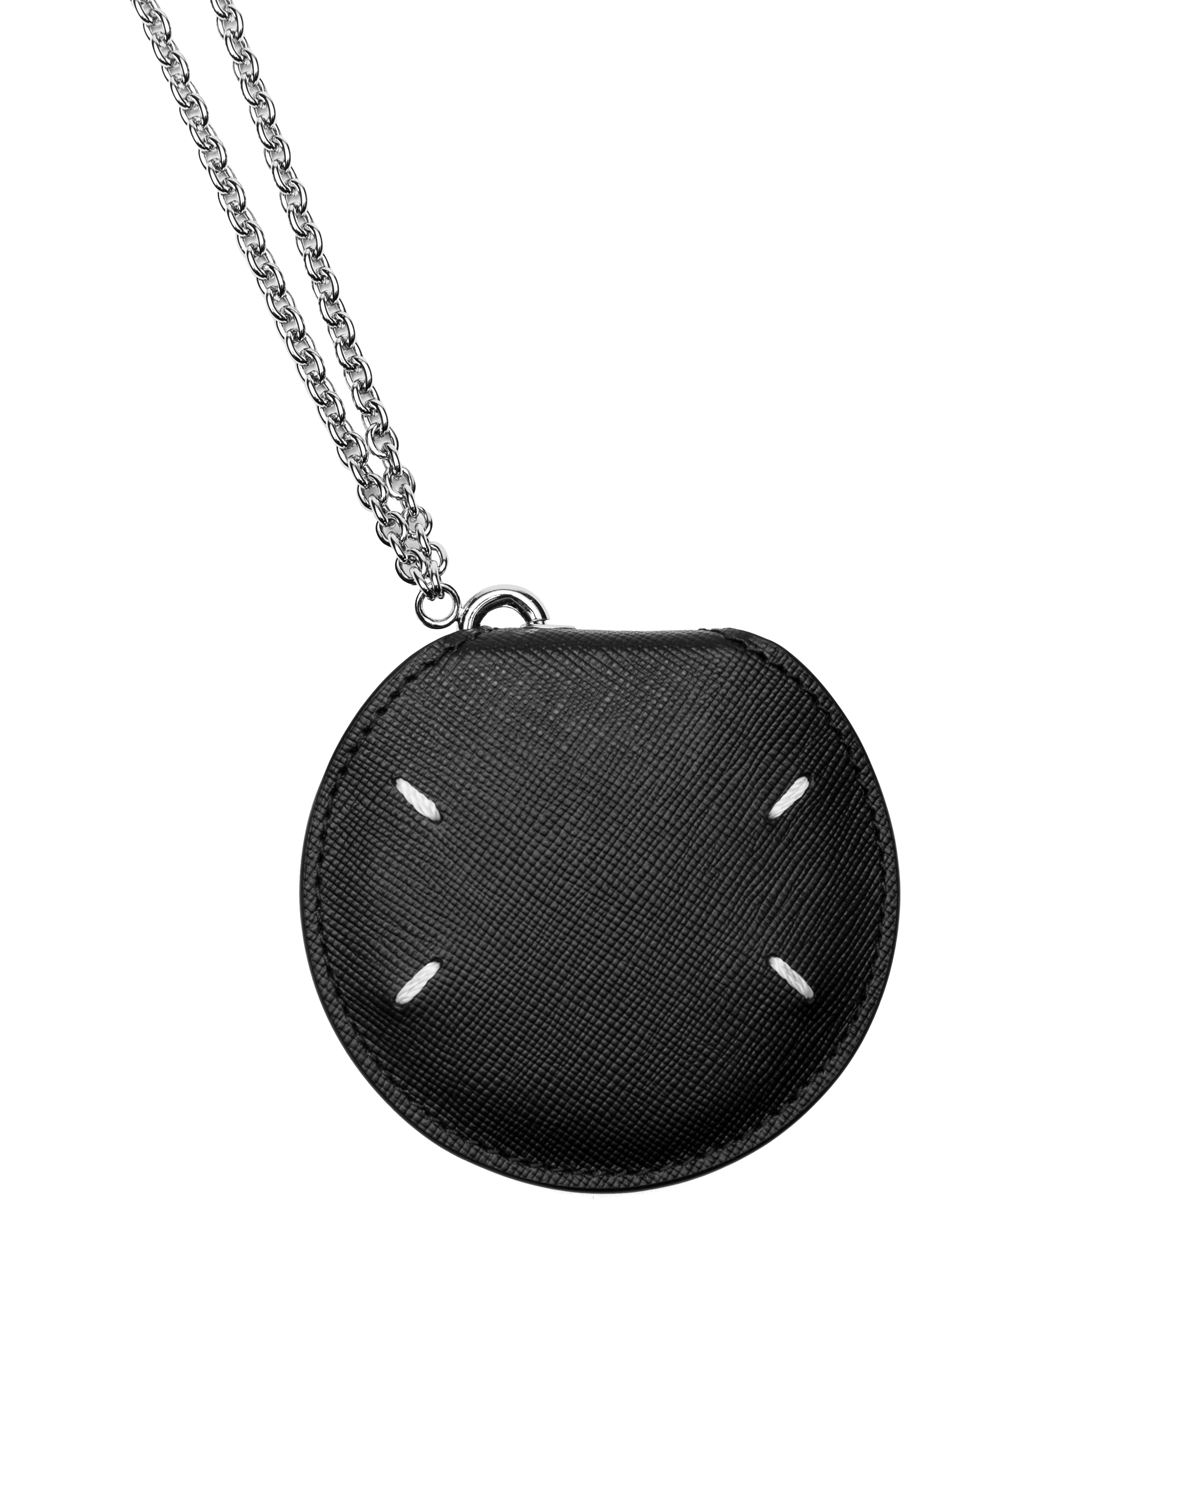 Leather Accessory Circle Object Black